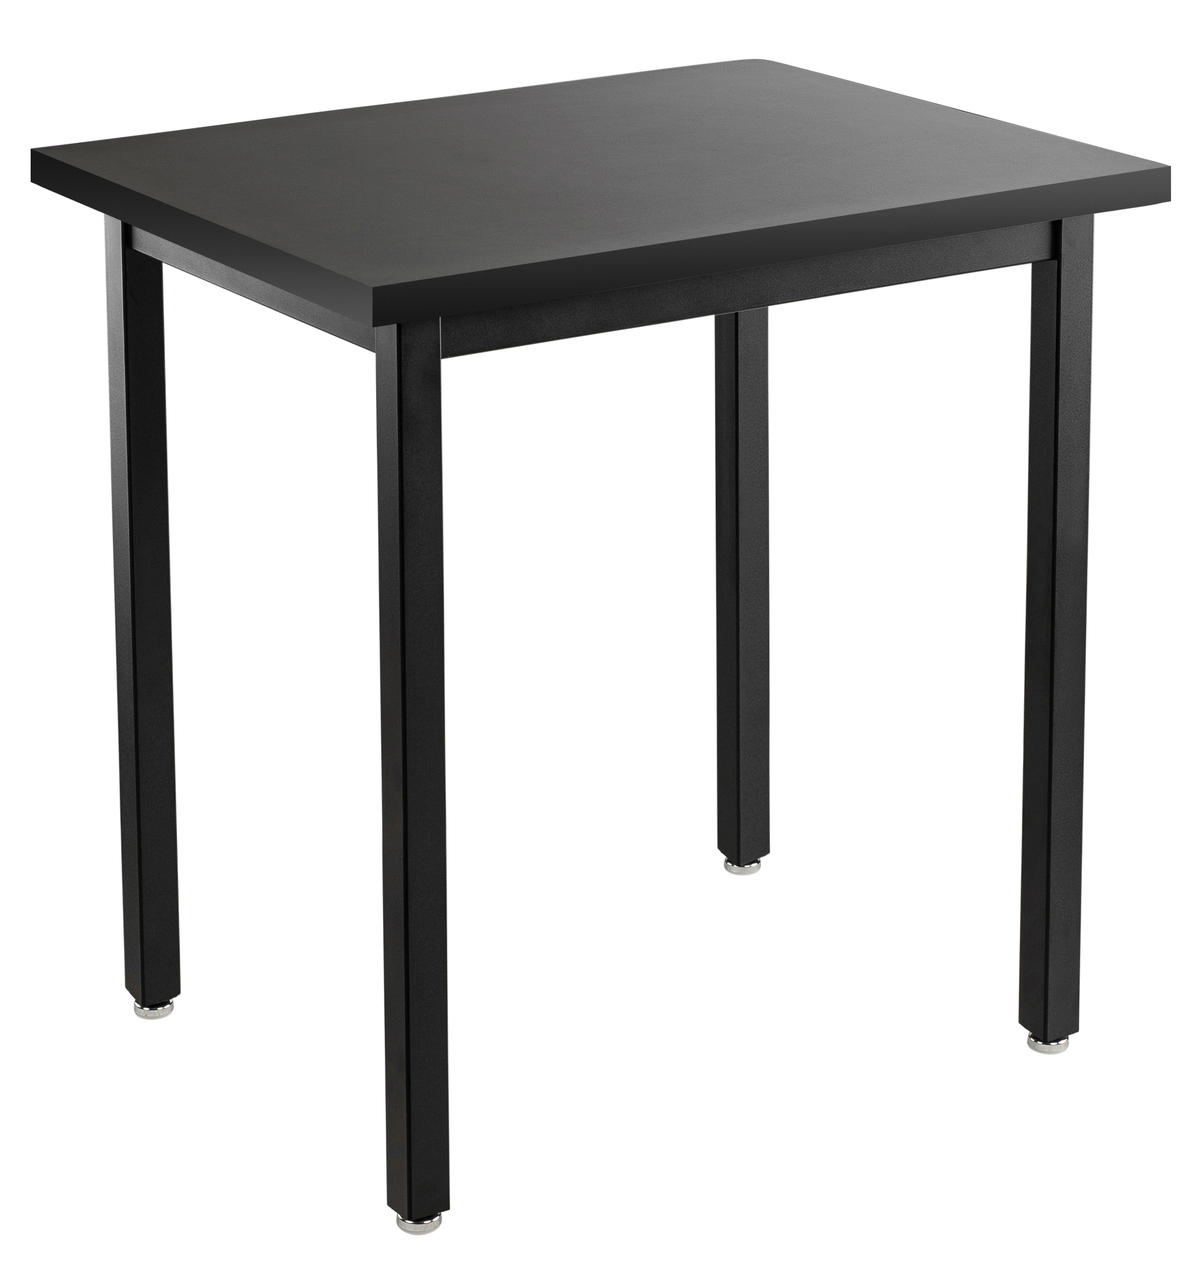 NPS Steel Science Lab Table -  24" x 36" -  Phenolic Top - Black Surface Color